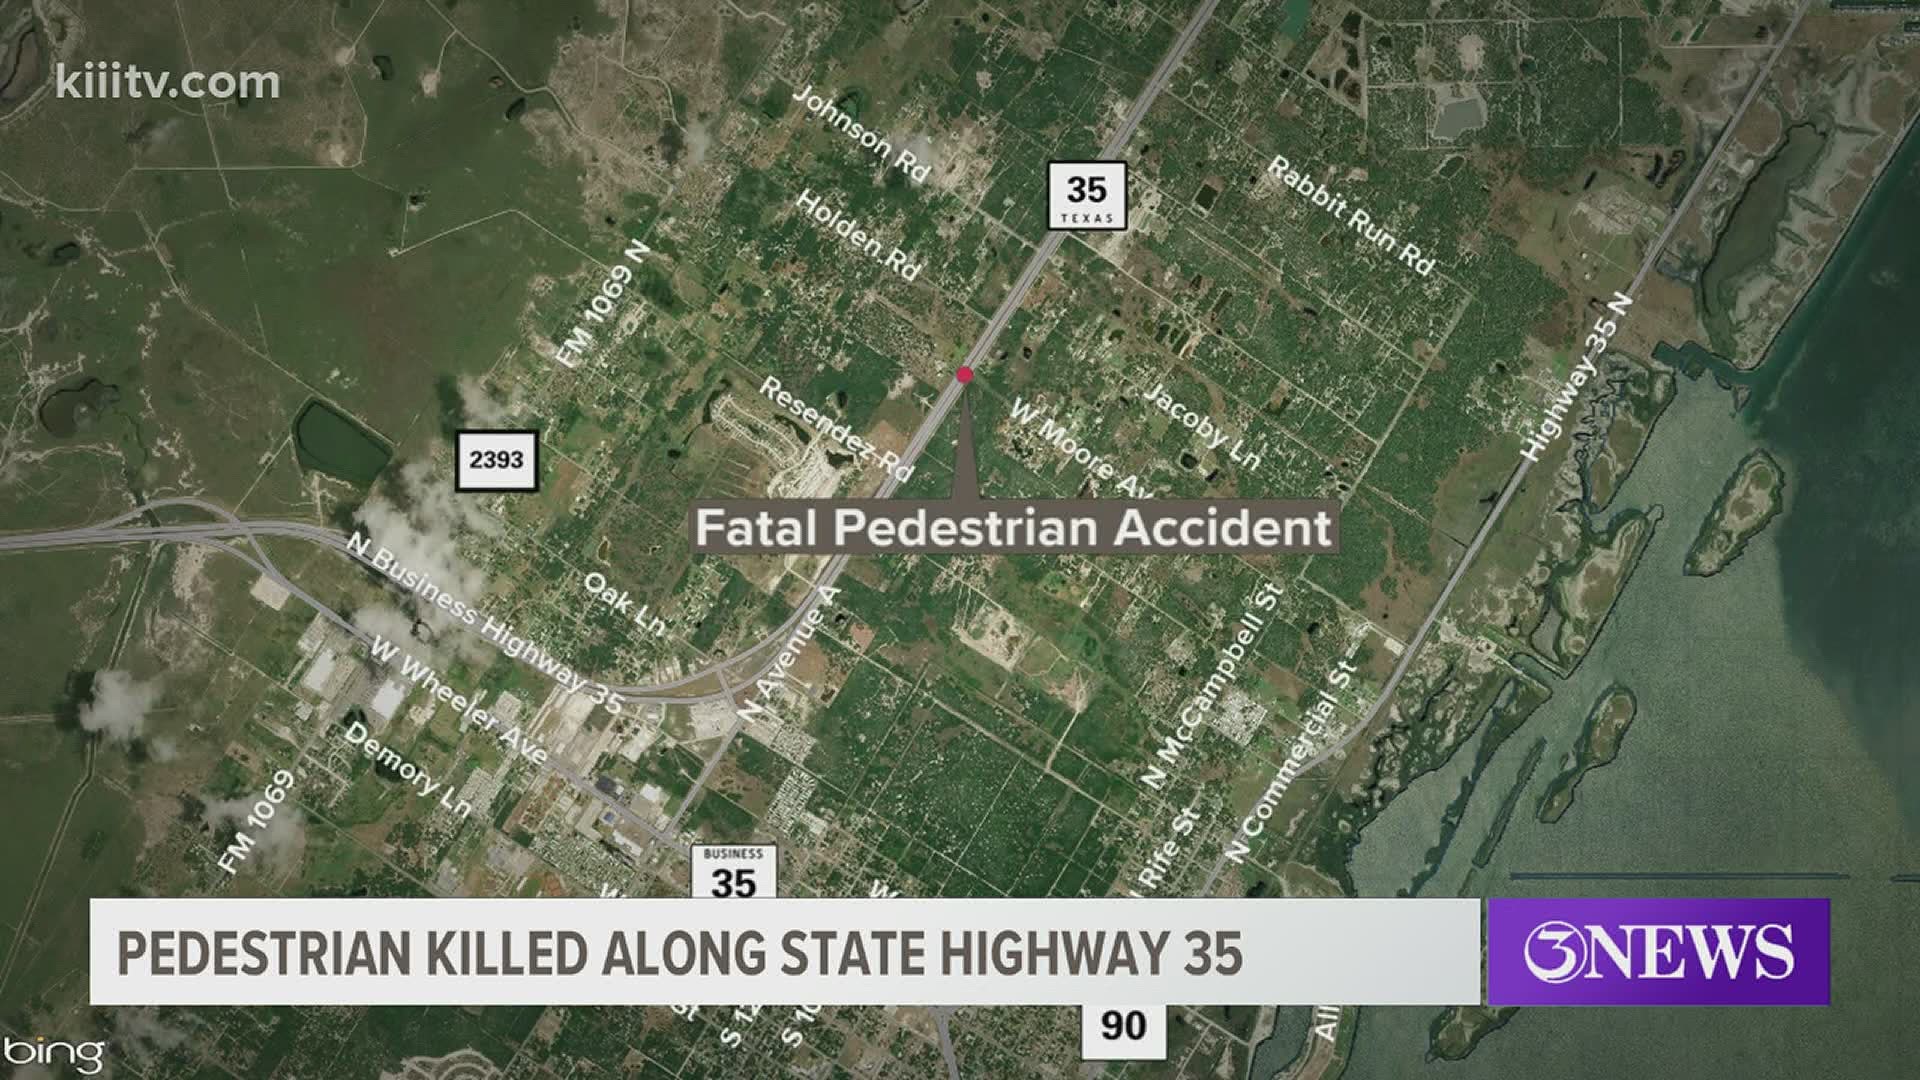 The victim was identified as 64-year-old Dred Martin, an Aransas County resident.